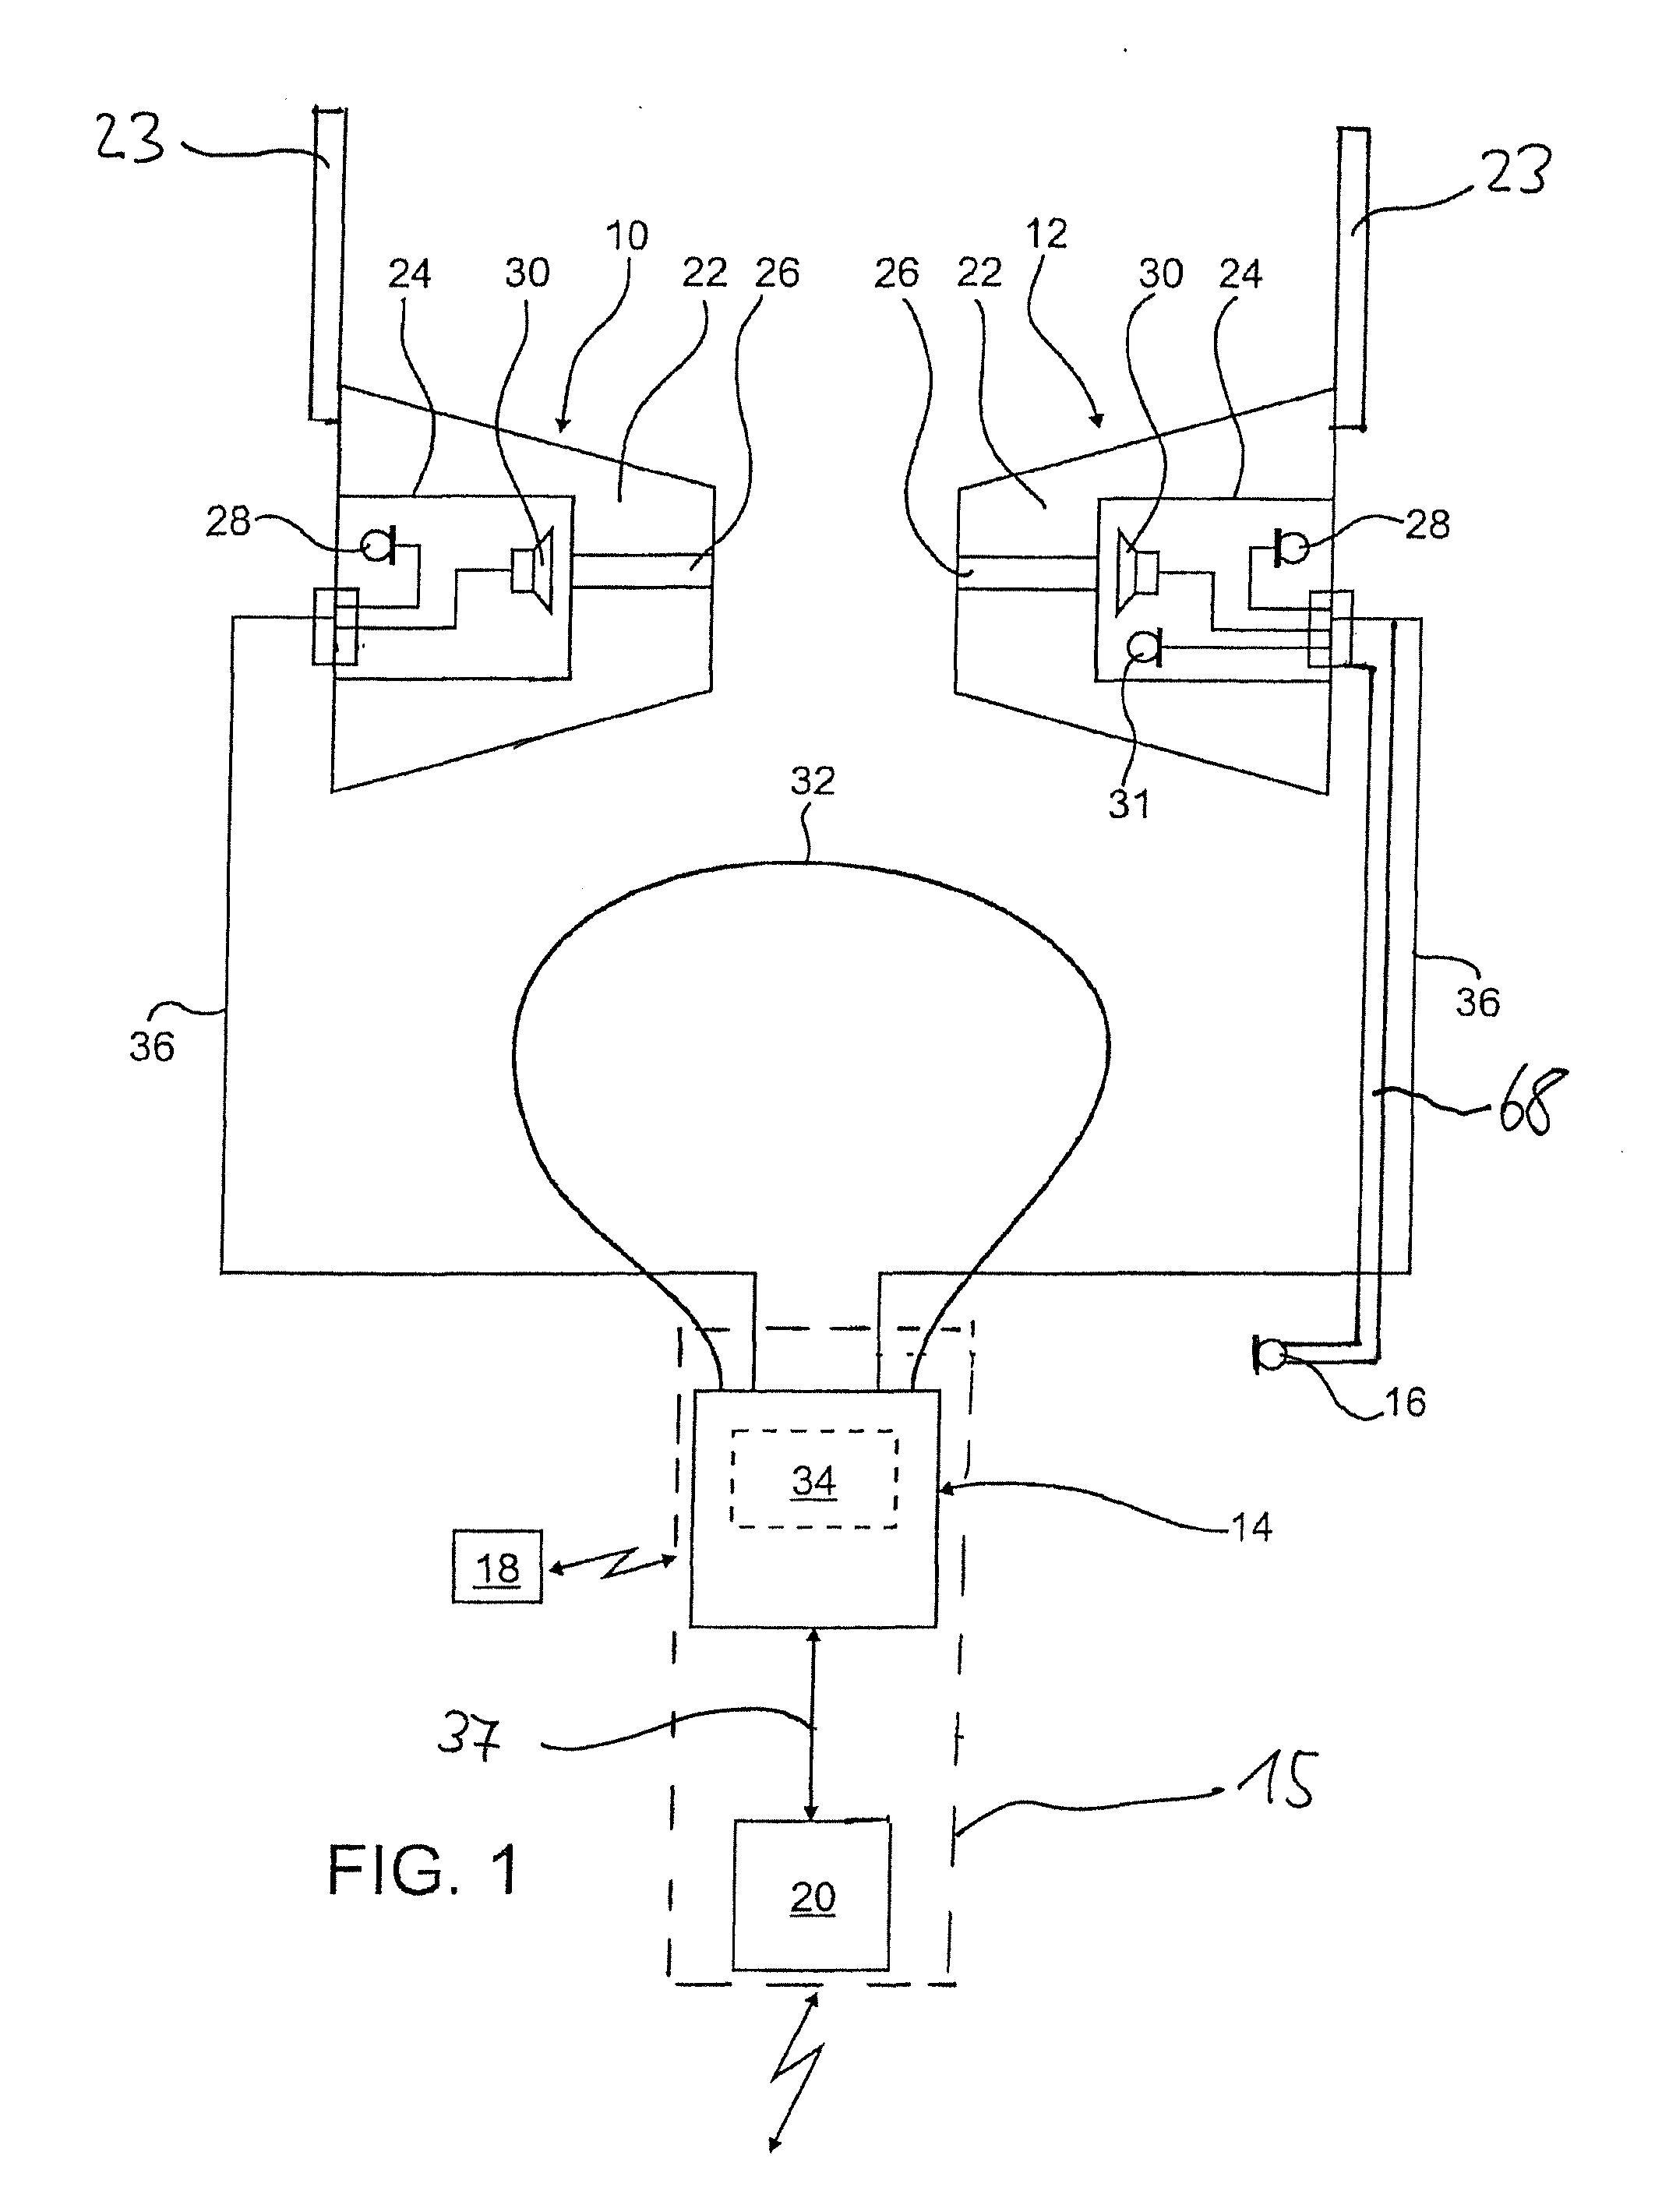 Hearing system comprising an earpiece